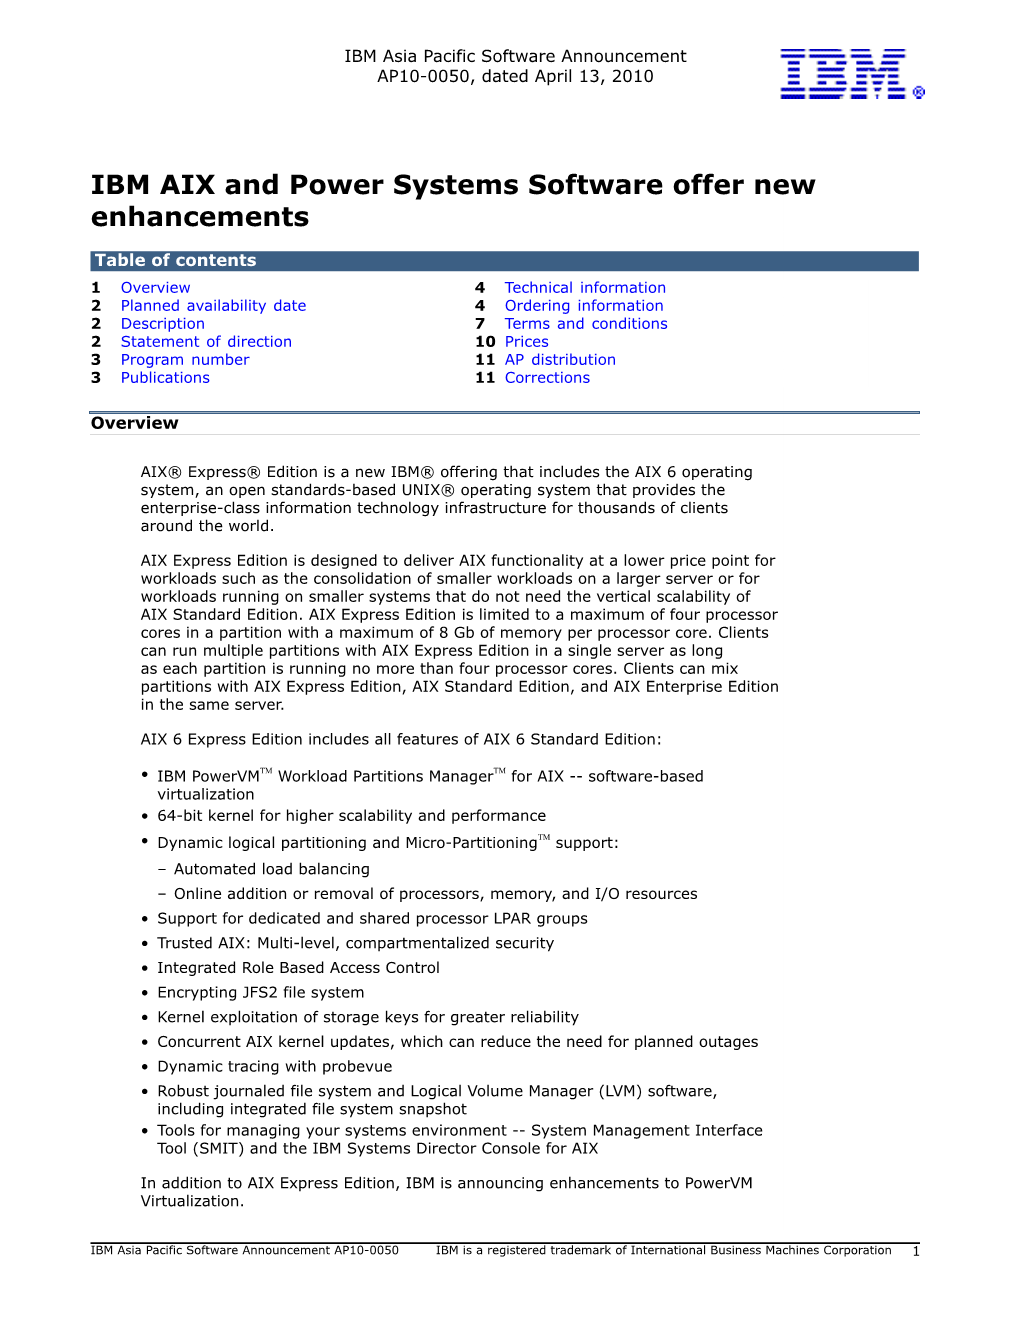 IBM AIX and Power Systems Software Offer New Enhancements